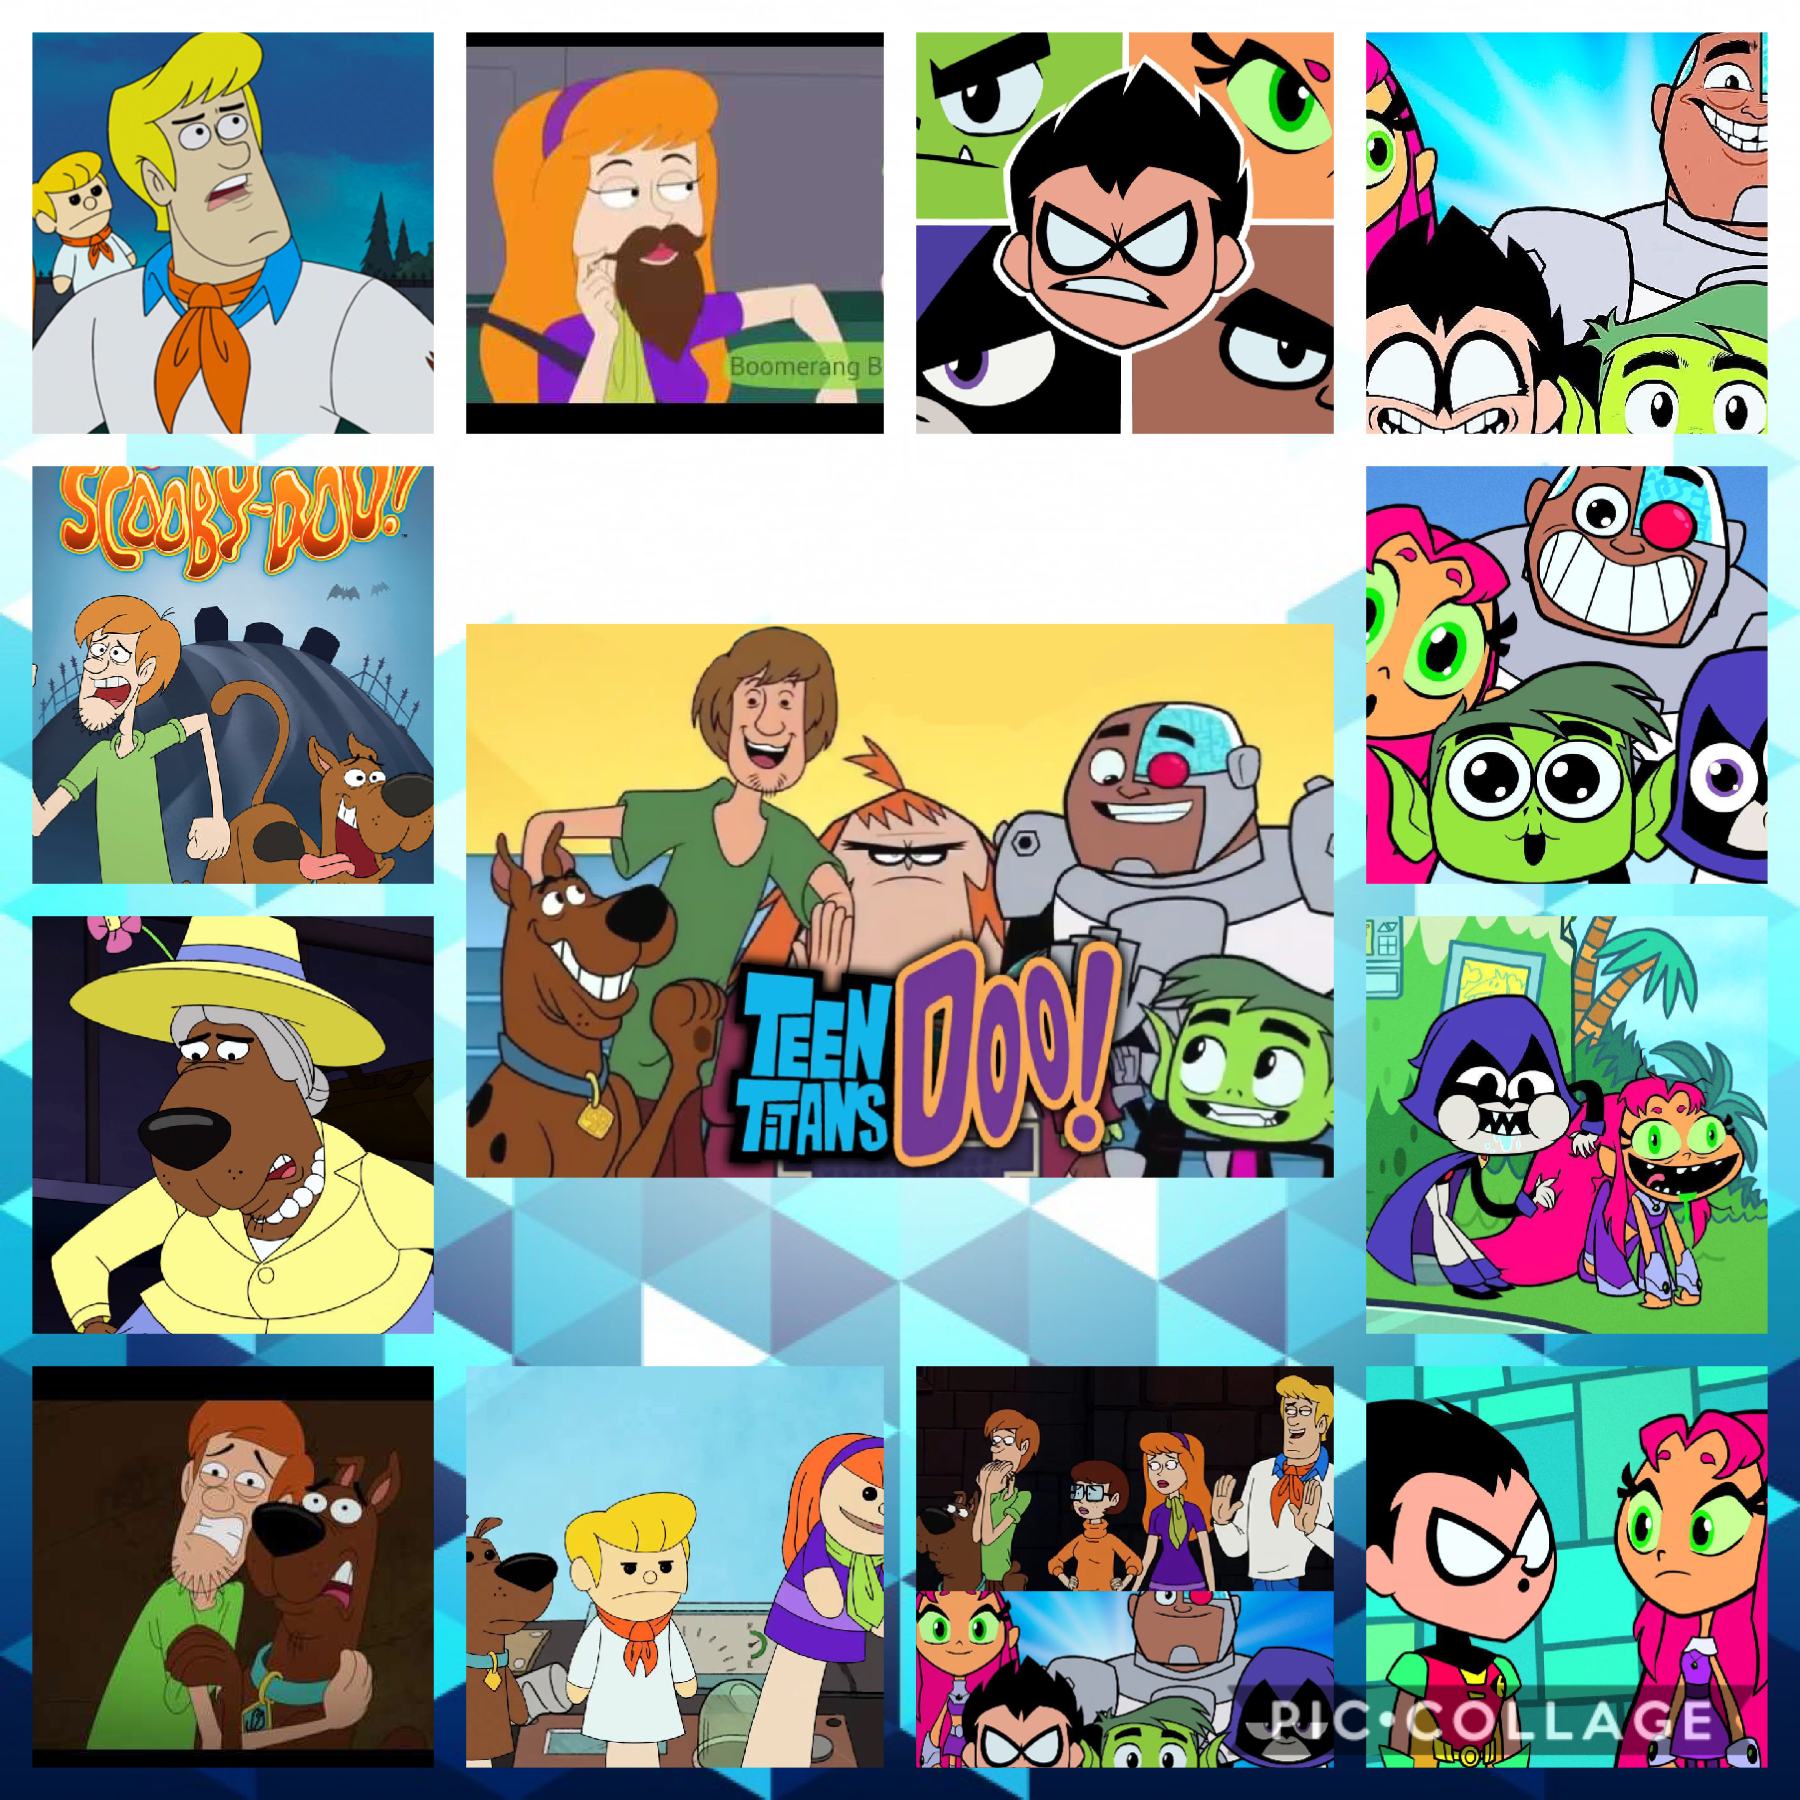 Scuby-doo and teen titans